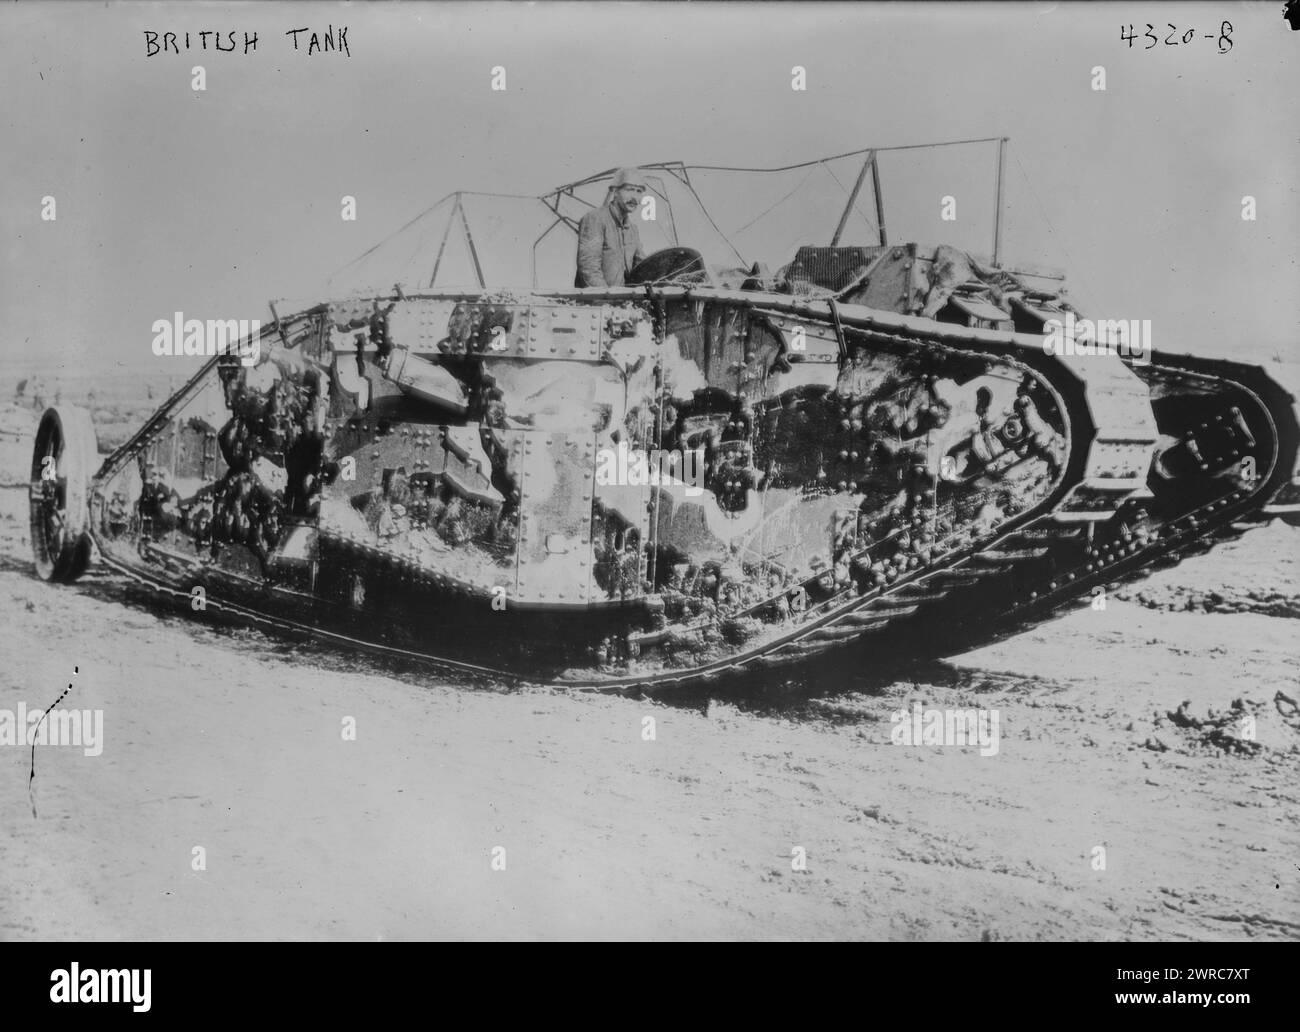 British tank, Photograph shows a British tank at the Battle of Flers-Courcelette, in the Somme, France on September 15, 1916 during World War I., 1916 Sept. 15, World War, 1914-1918, Glass negatives, 1 negative: glass Stock Photo